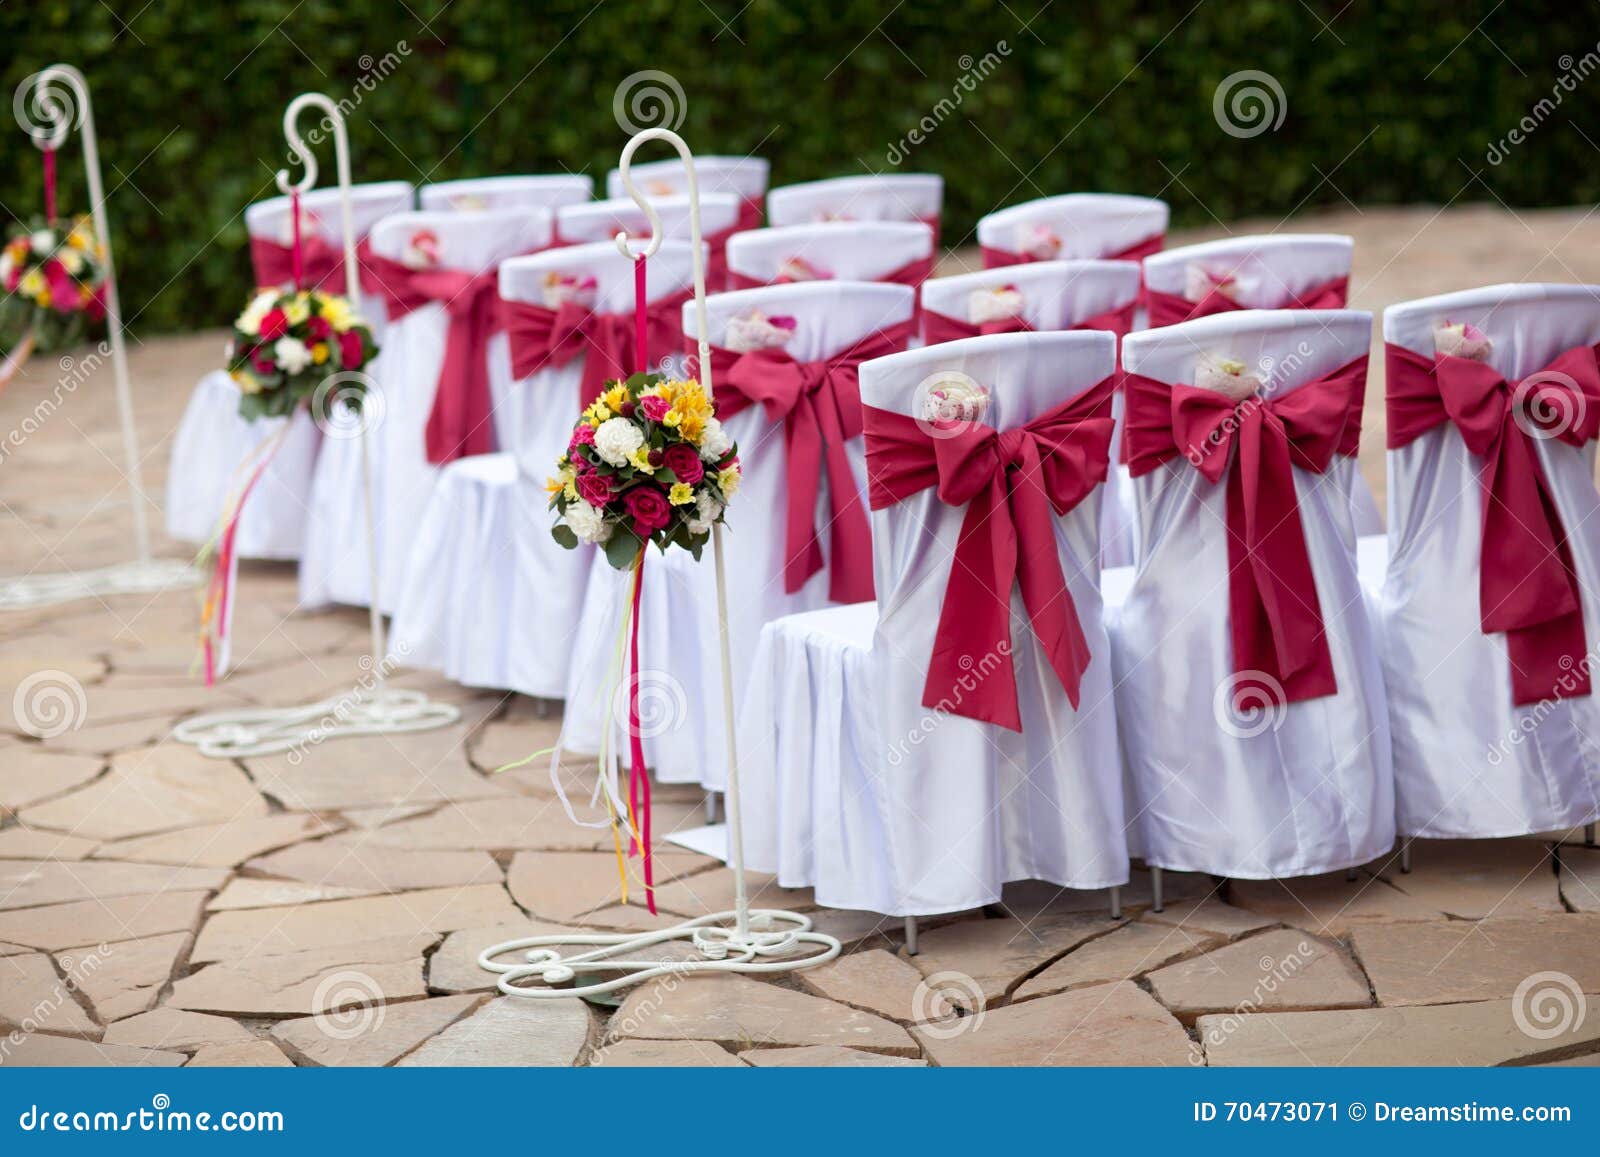 Chairs With Bows Stock Image Image Of Drink Ribbon 70473071